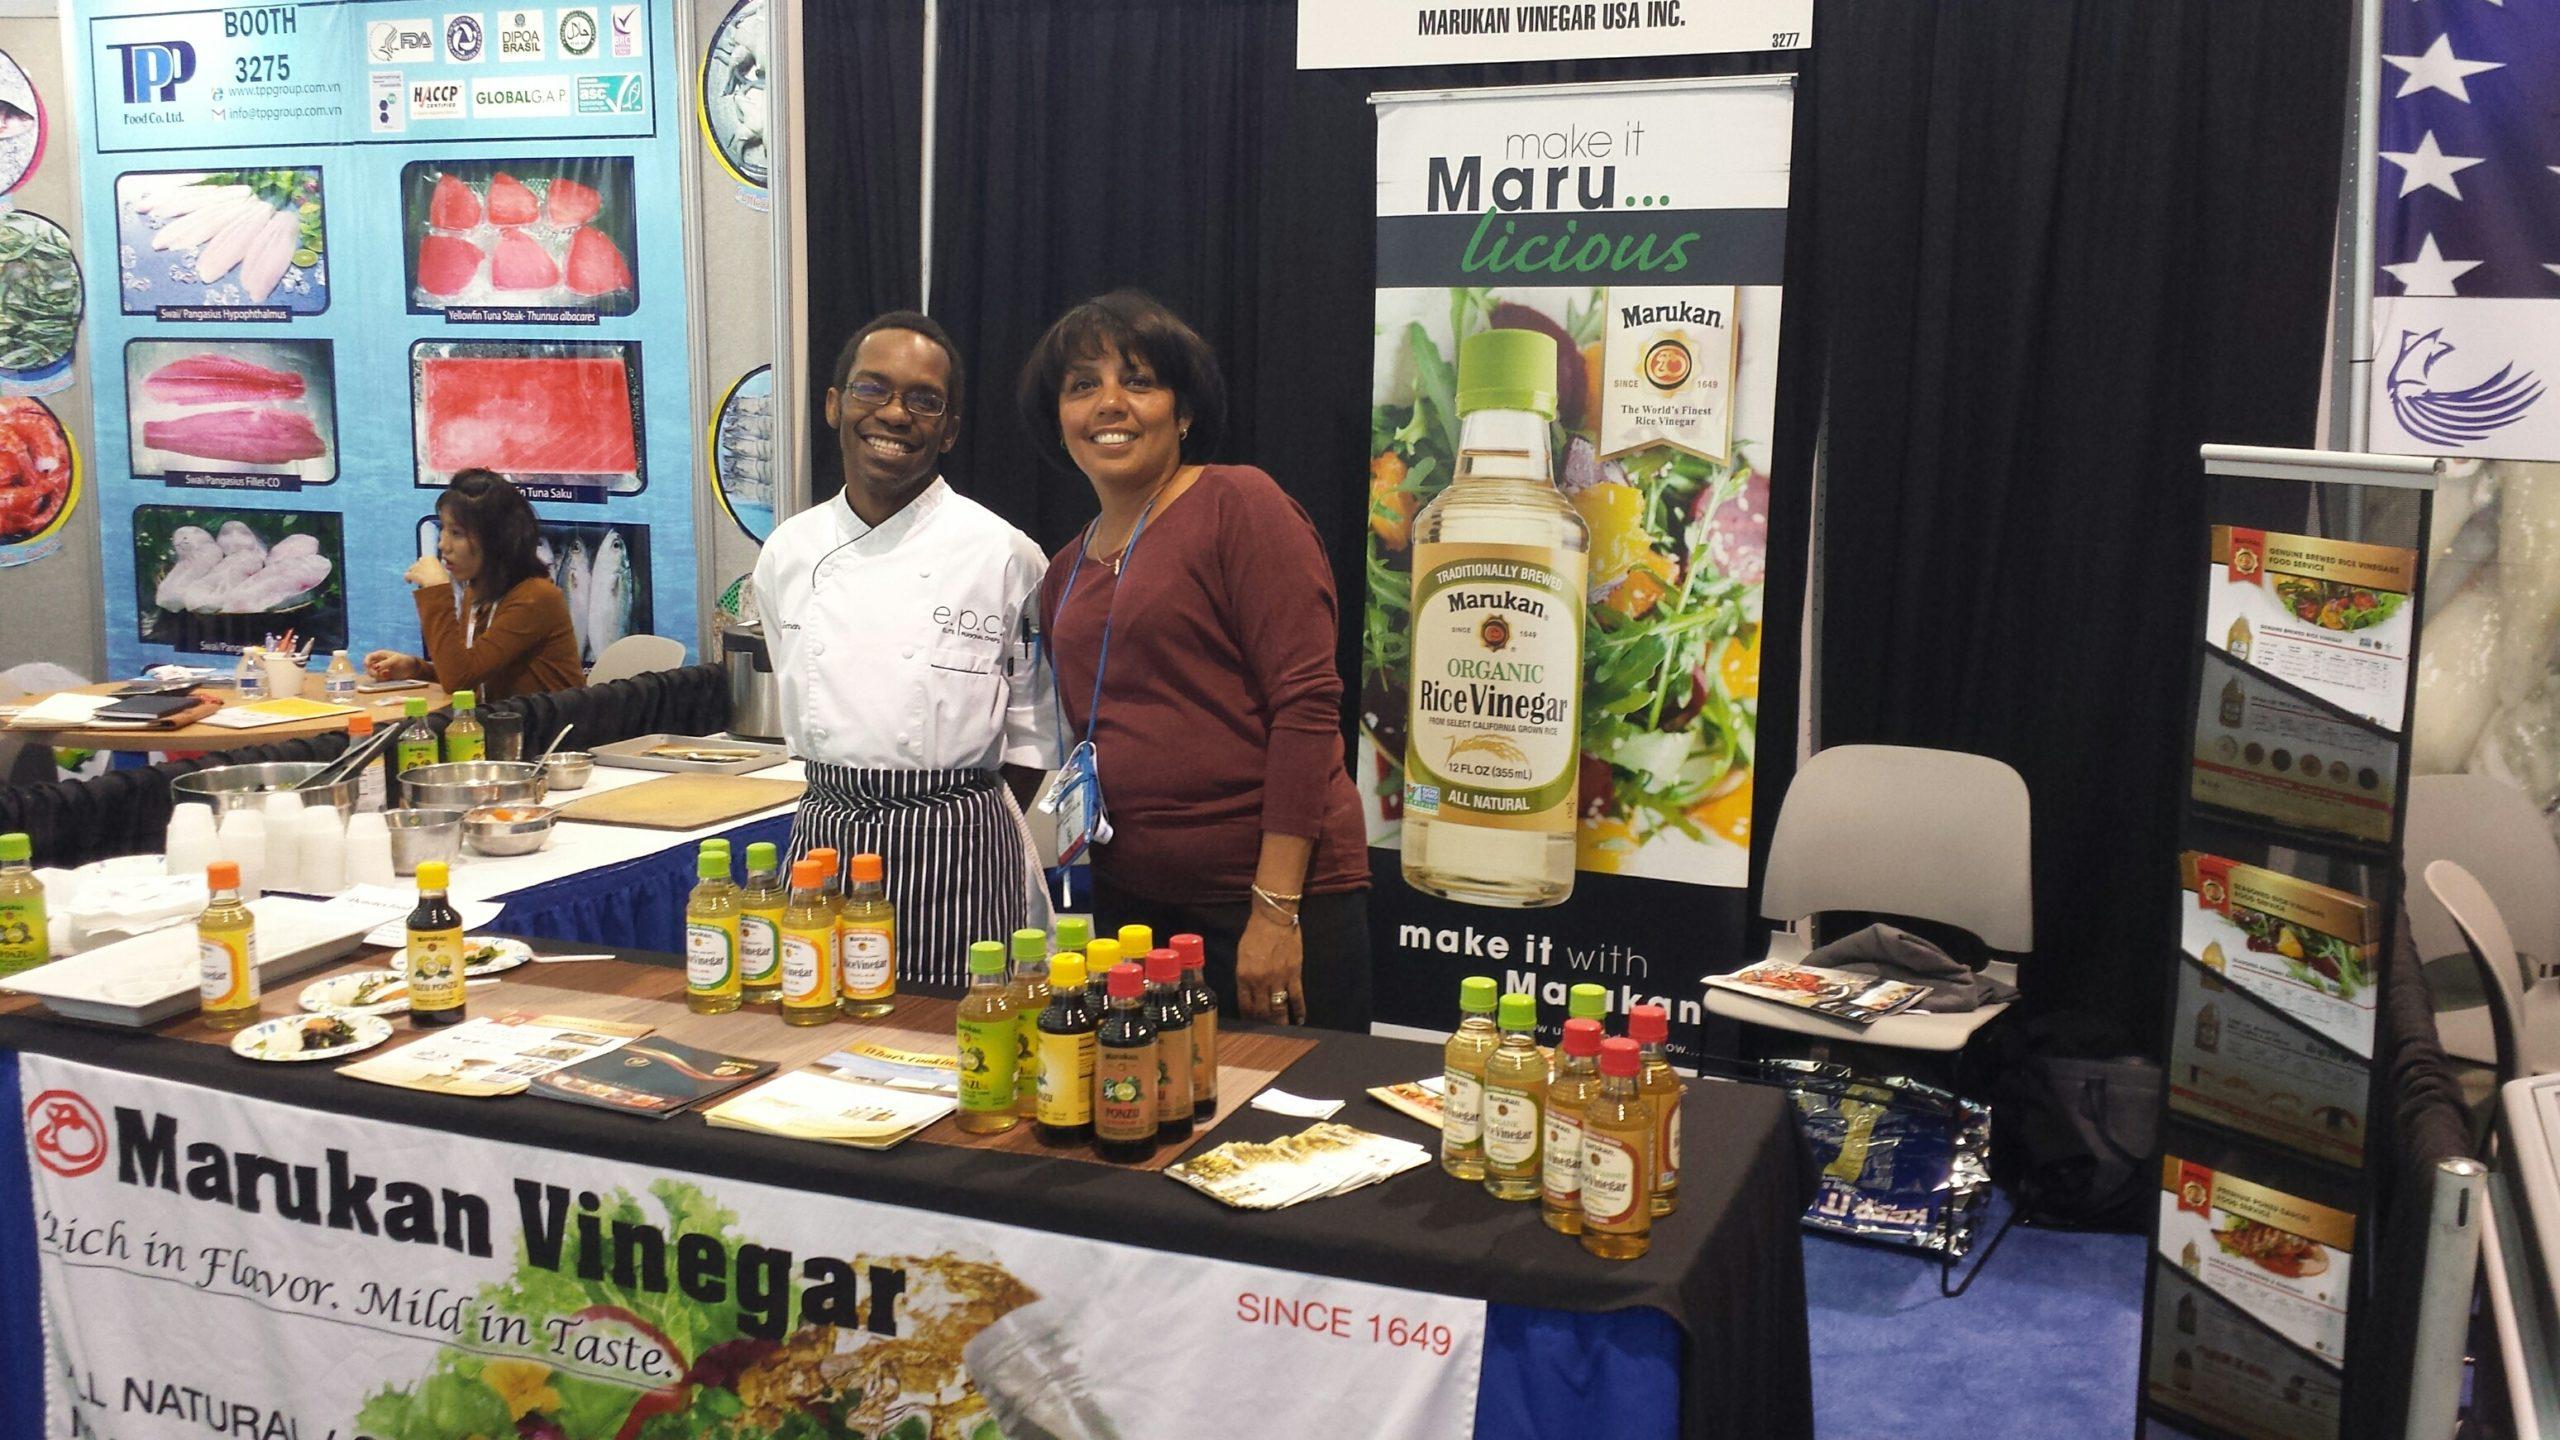 Ceviche and Salad Dishes Featured by Marukan at the Seafood Expo North America